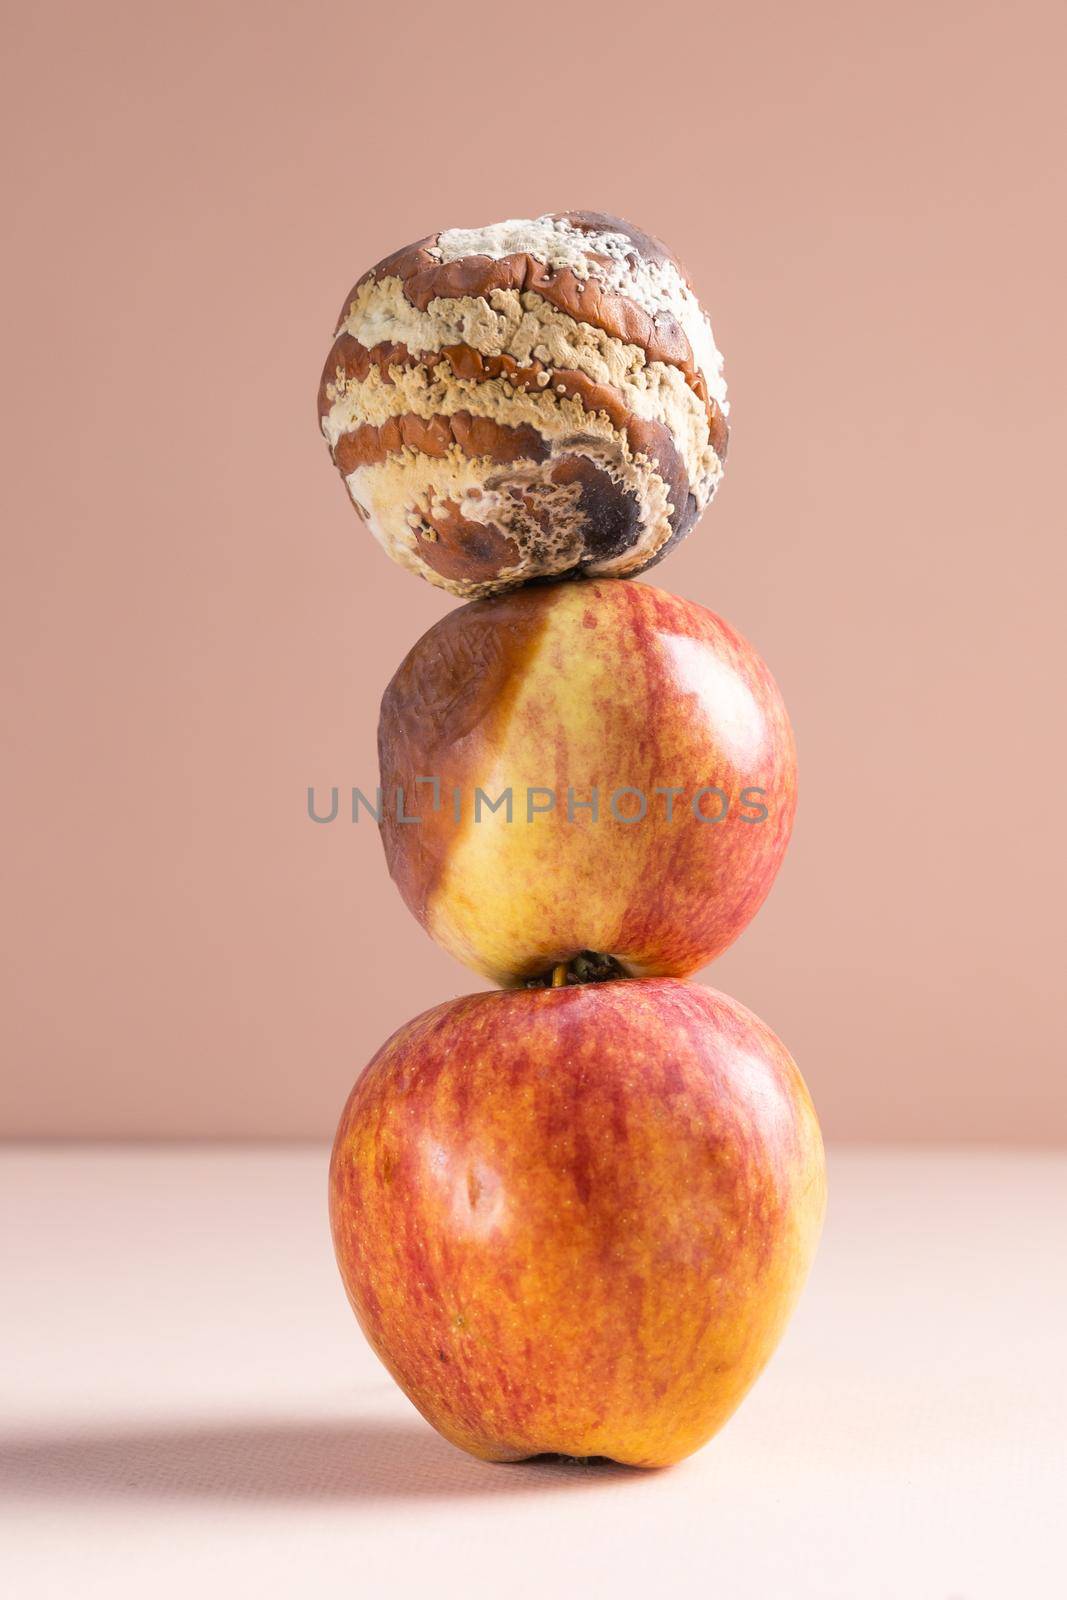 Apple with mold and fresh apple on beige background - mold growth and food spoilage concept